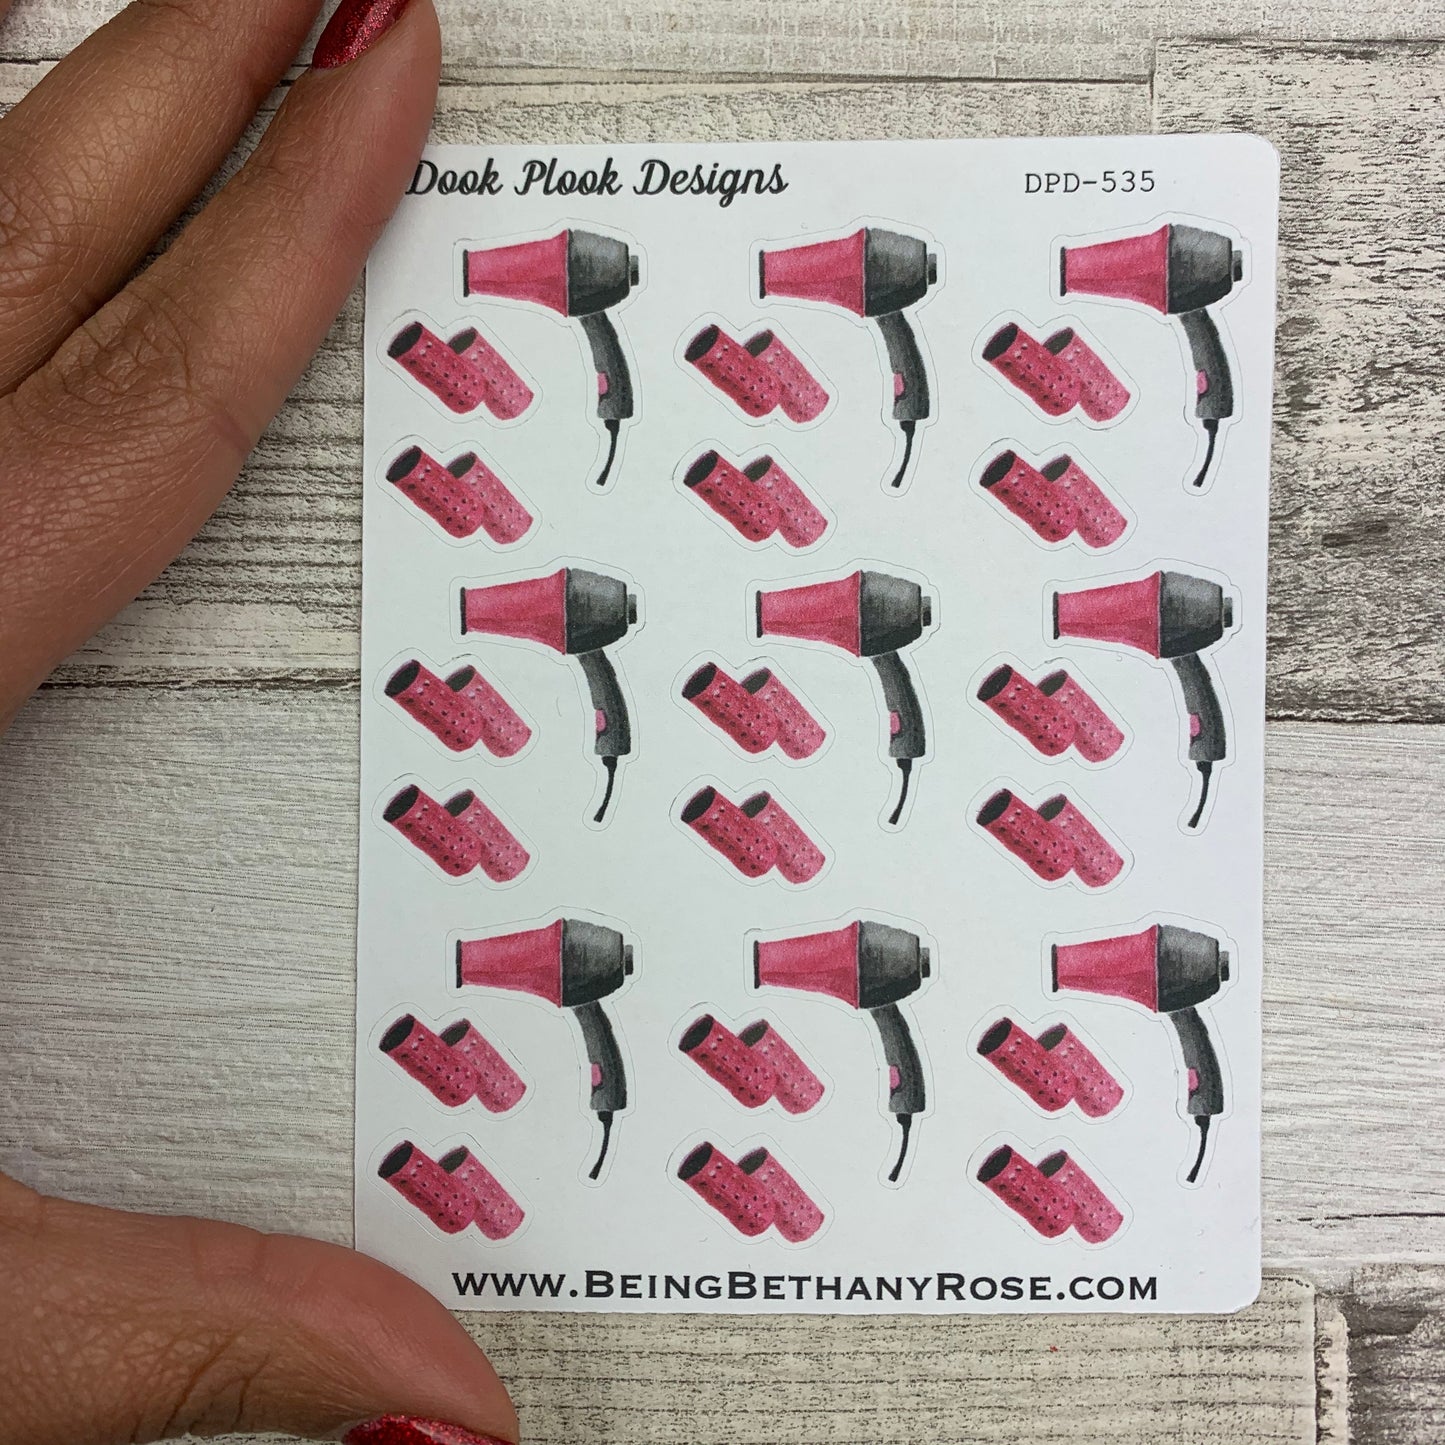 Hair dryer and roller stickers (DPD535)